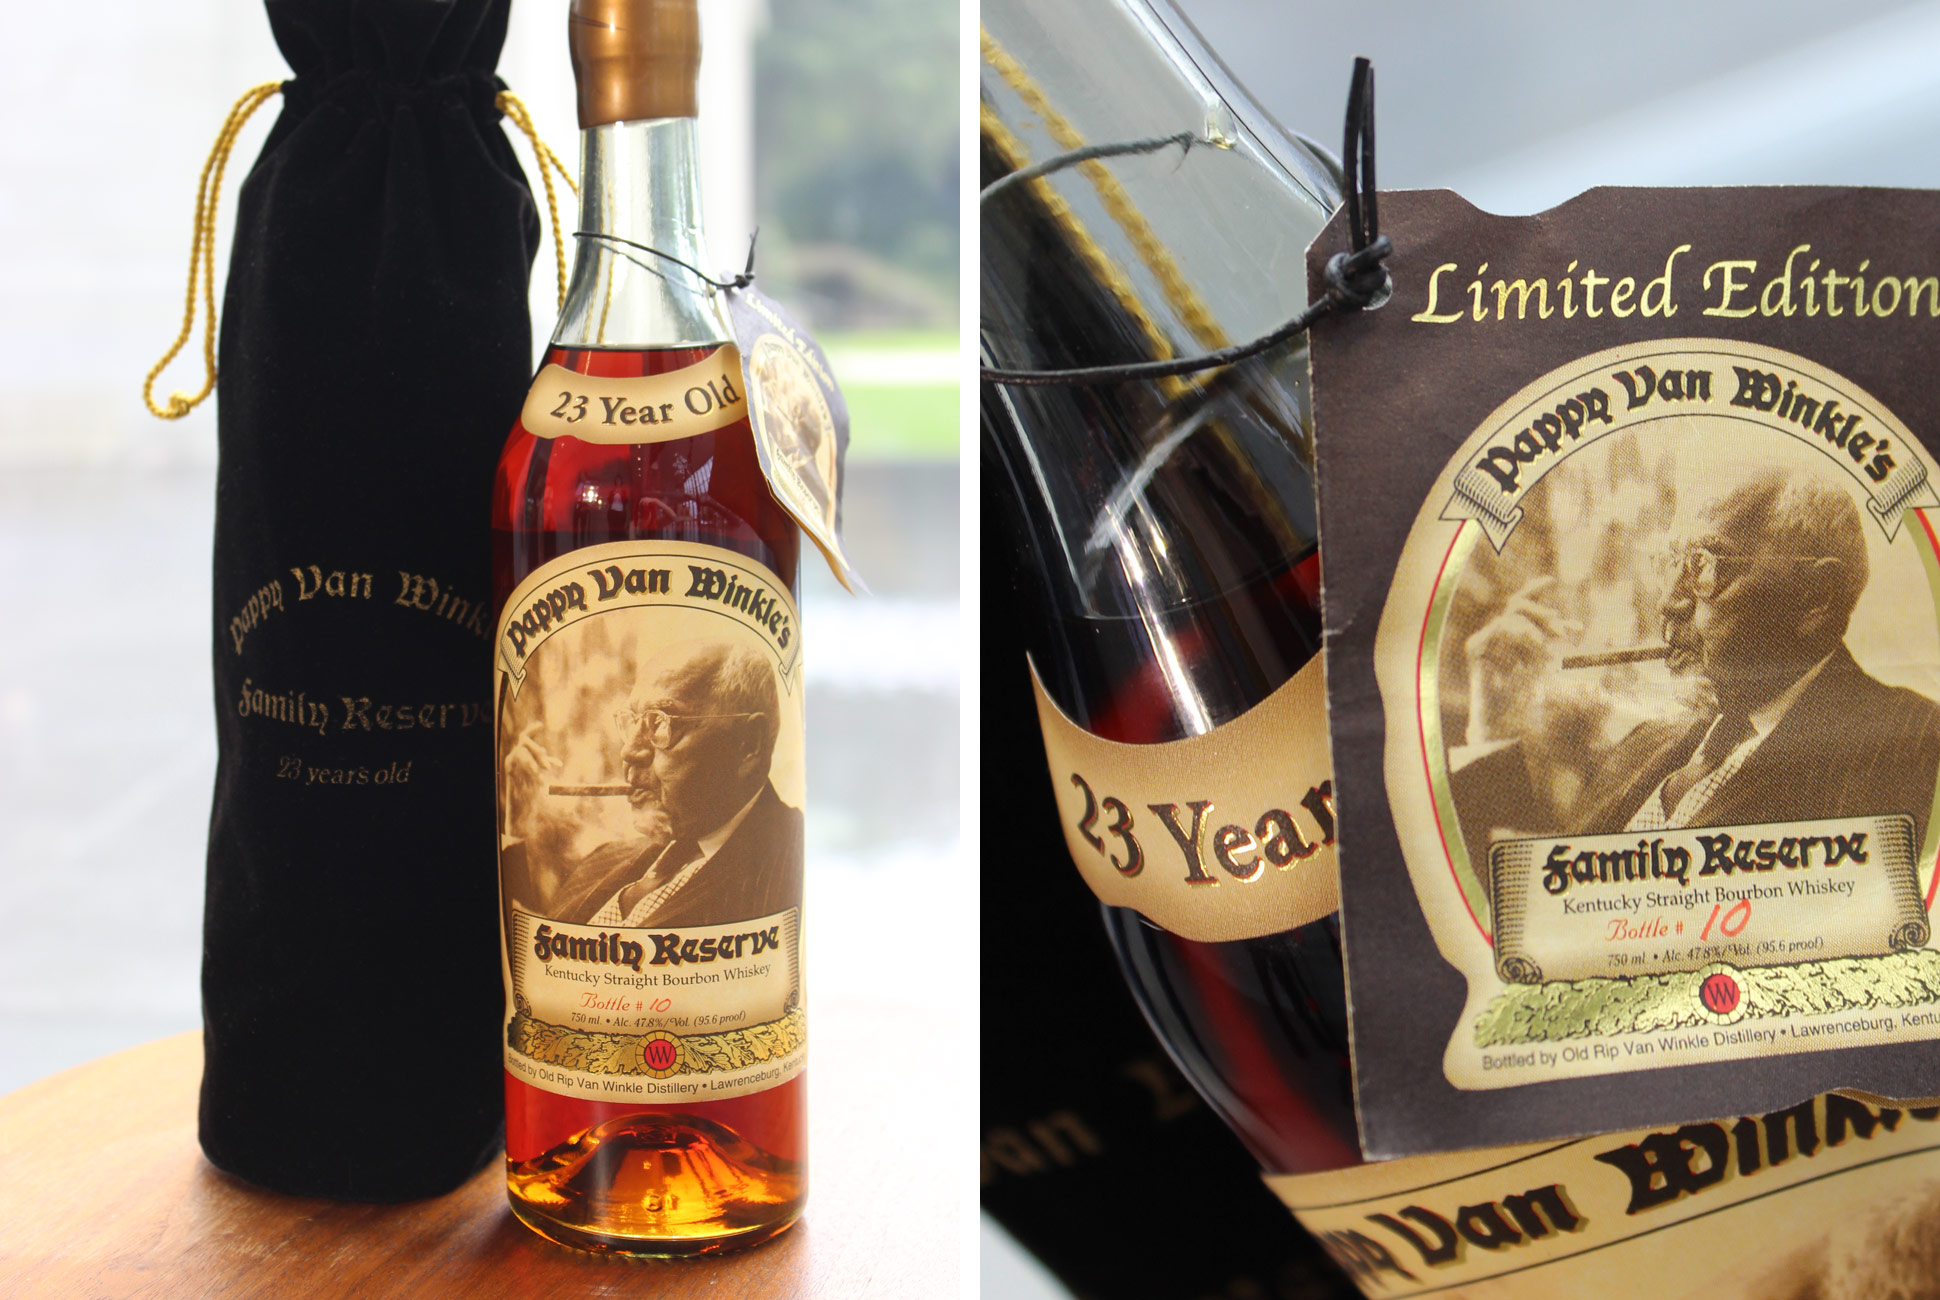 This Is One of the Rarest Bottles of Pappy Van Winkle in the World — Here’s Why